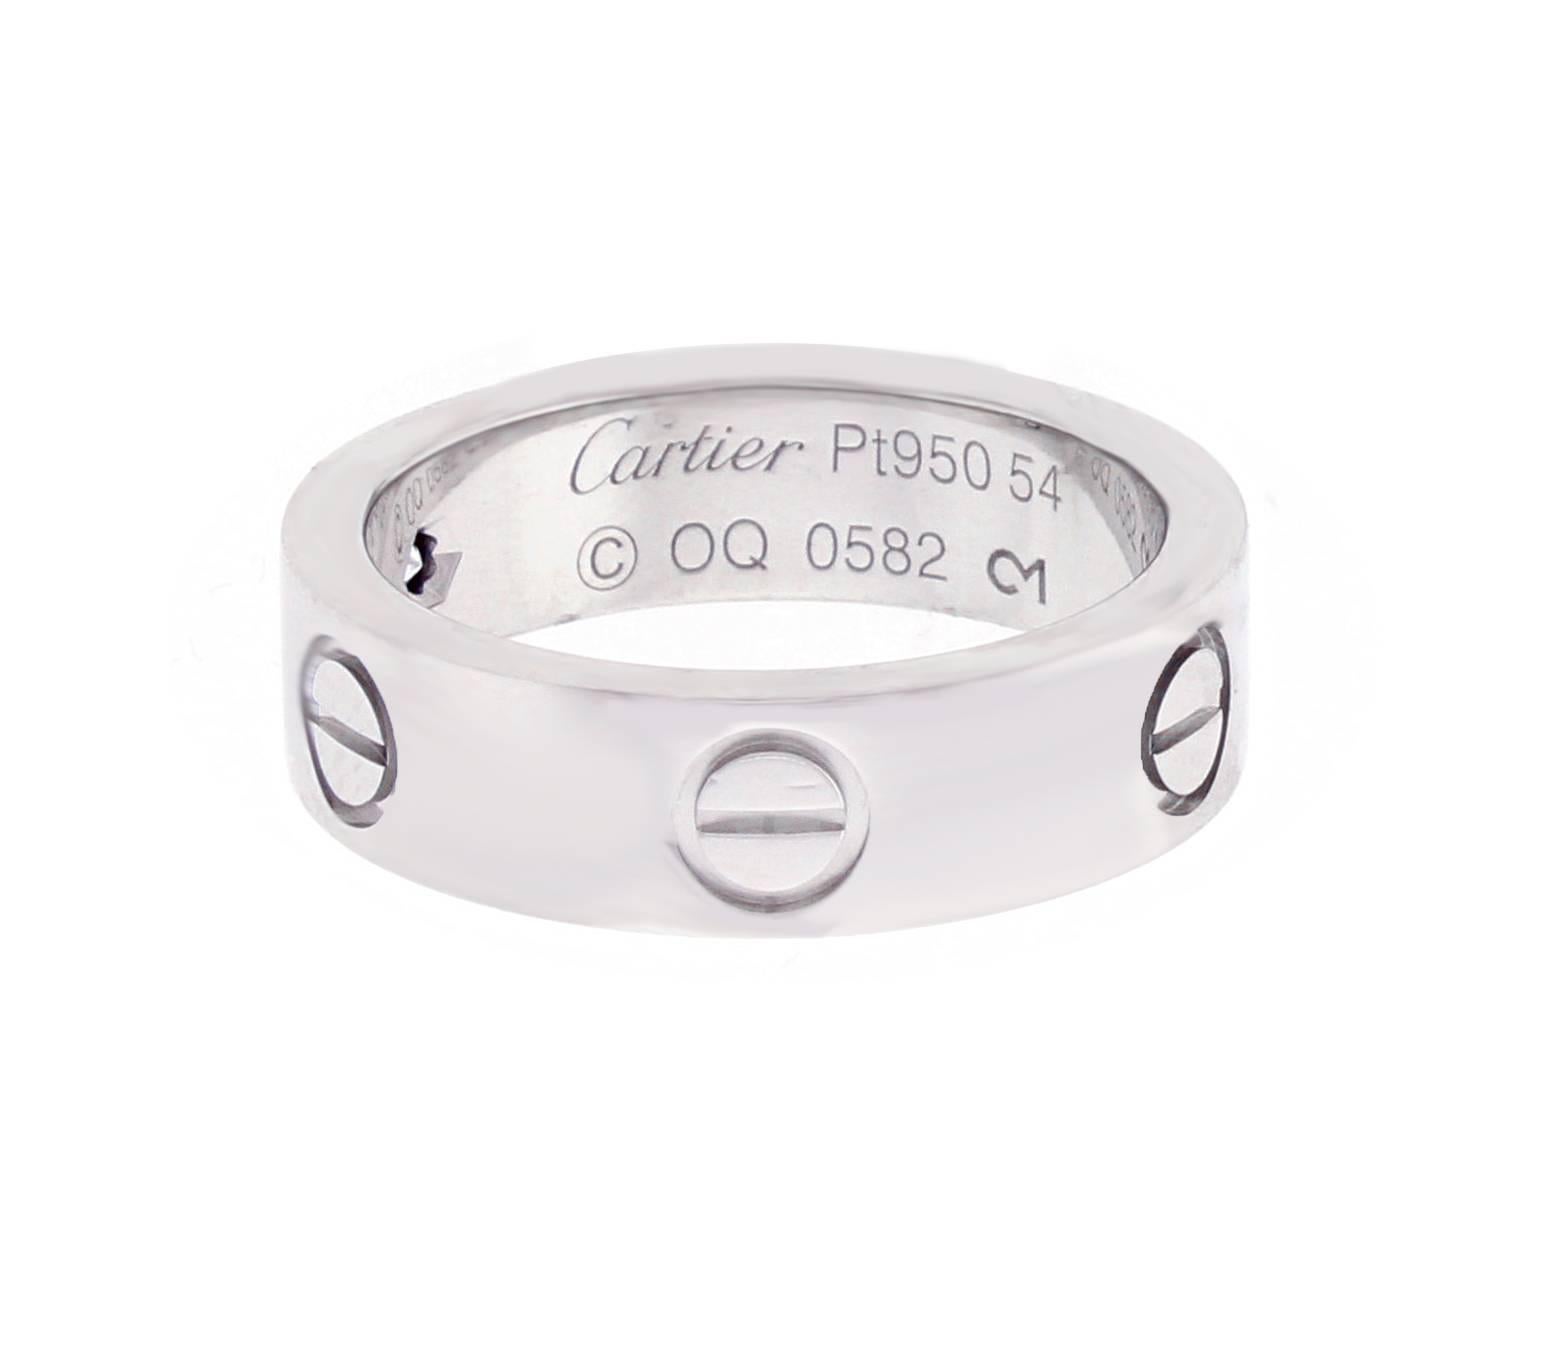 The Cartier LOVE collection remains today an iconic symbol of love that transgresses convention. The screw motifs and undeniable elegance establish the piece as a timeless tribute to passionate romance. Single Diamond weighs .07 carats, 5.5mm wide, 